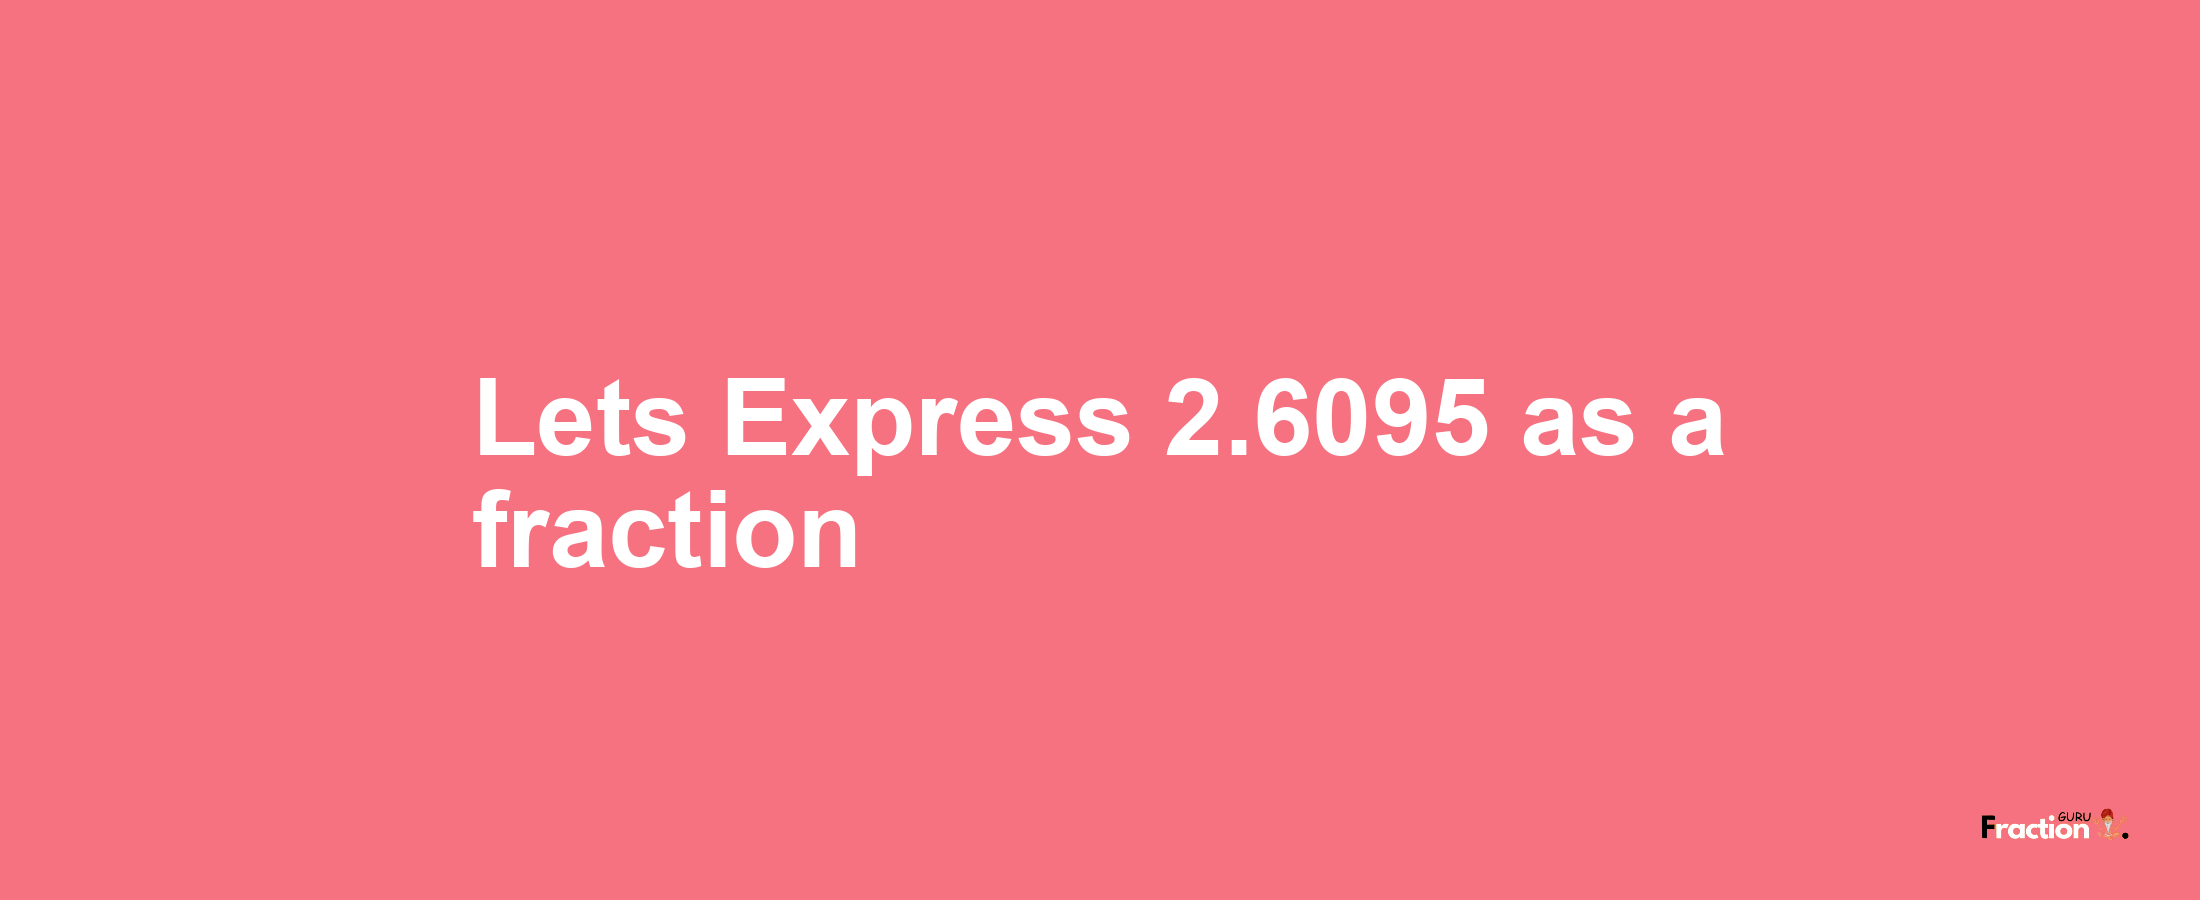 Lets Express 2.6095 as afraction